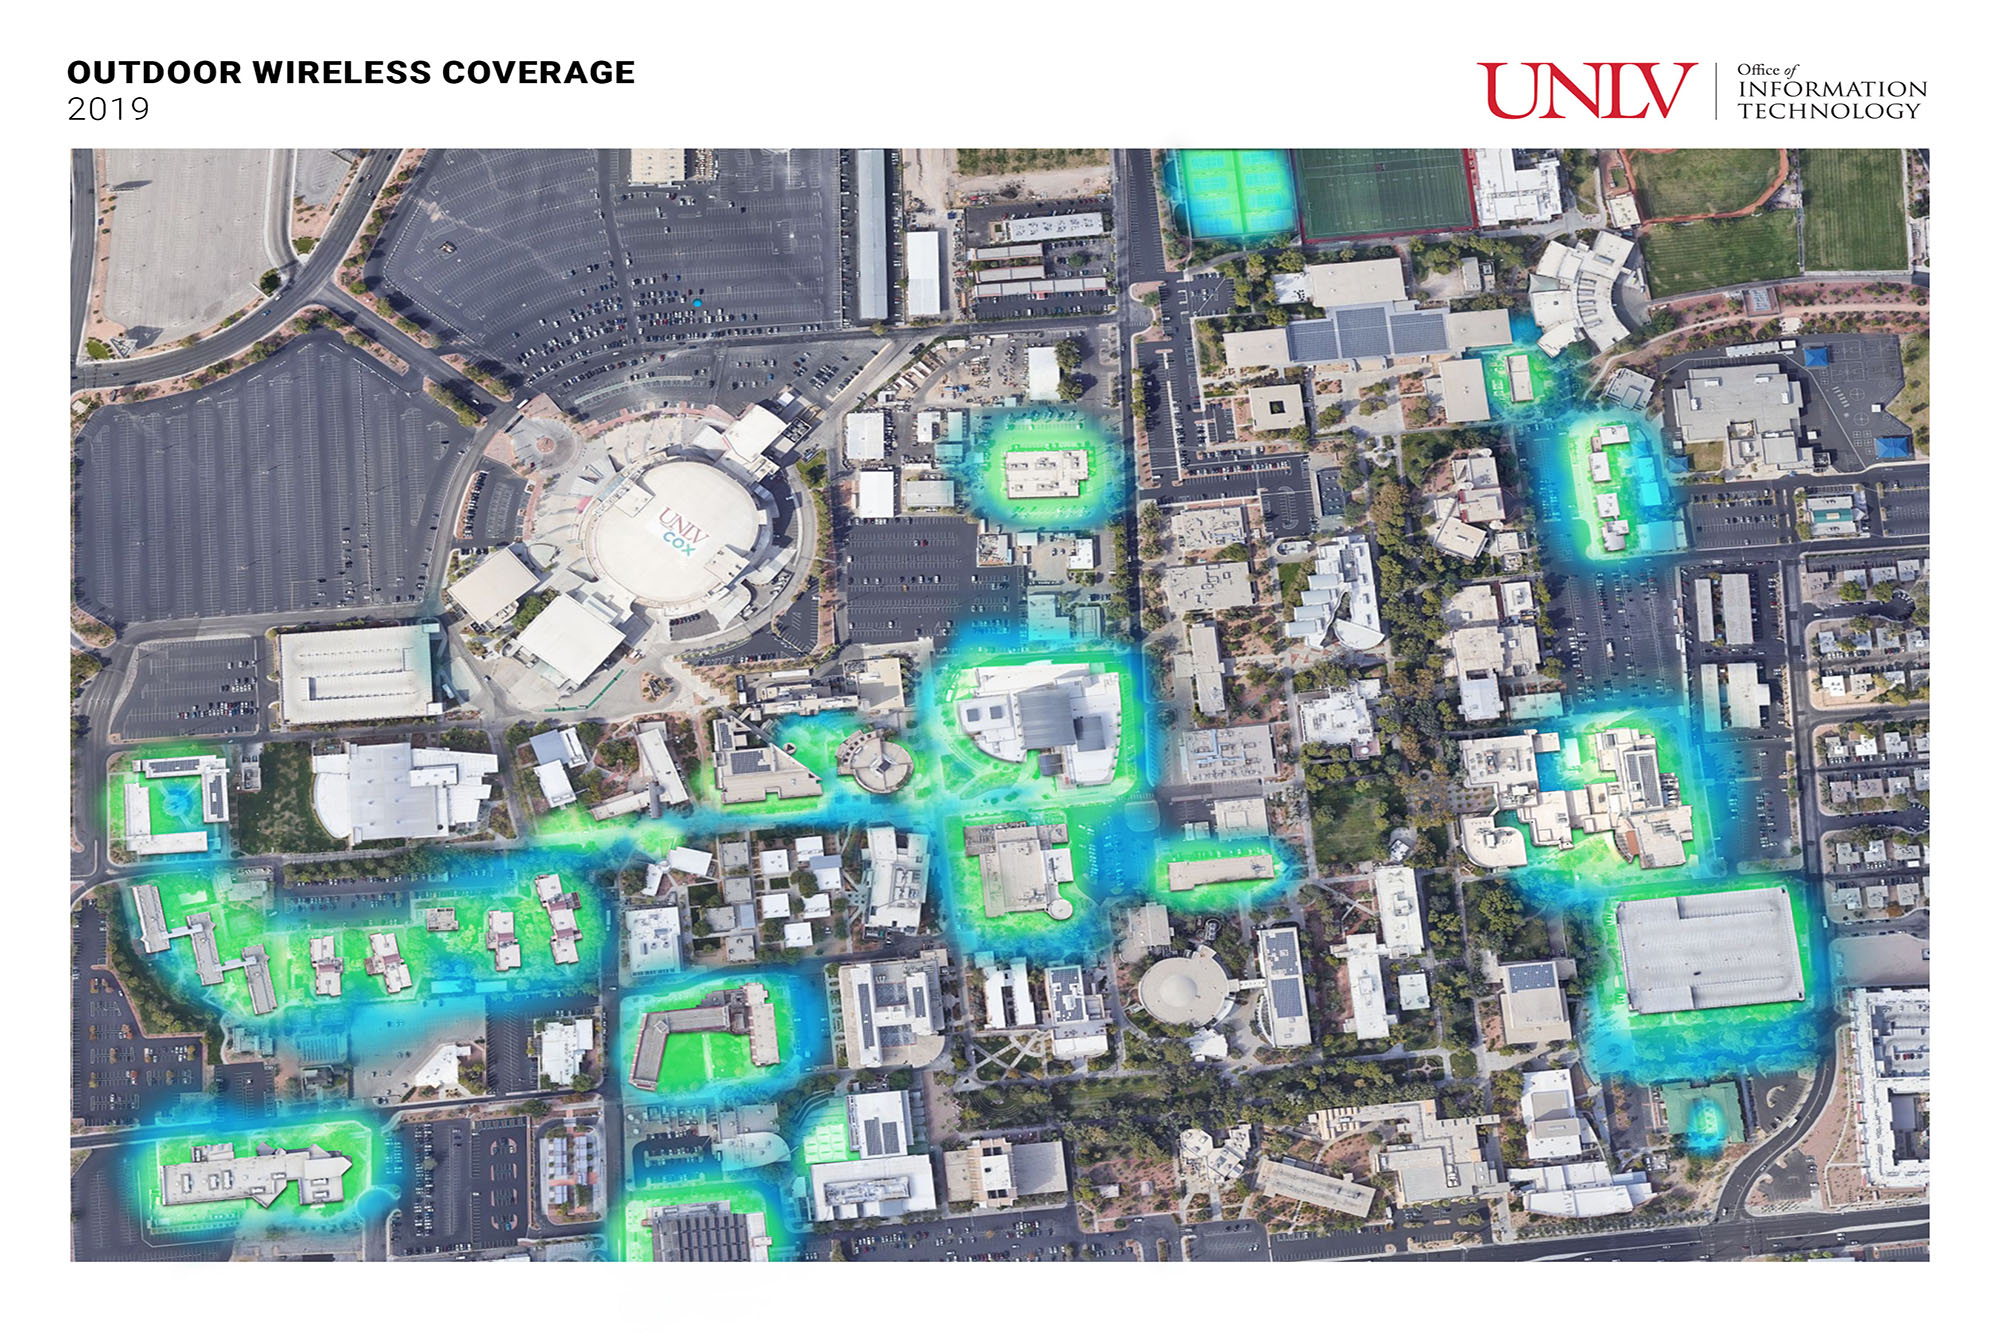 unlv wireless coverage map of 2019